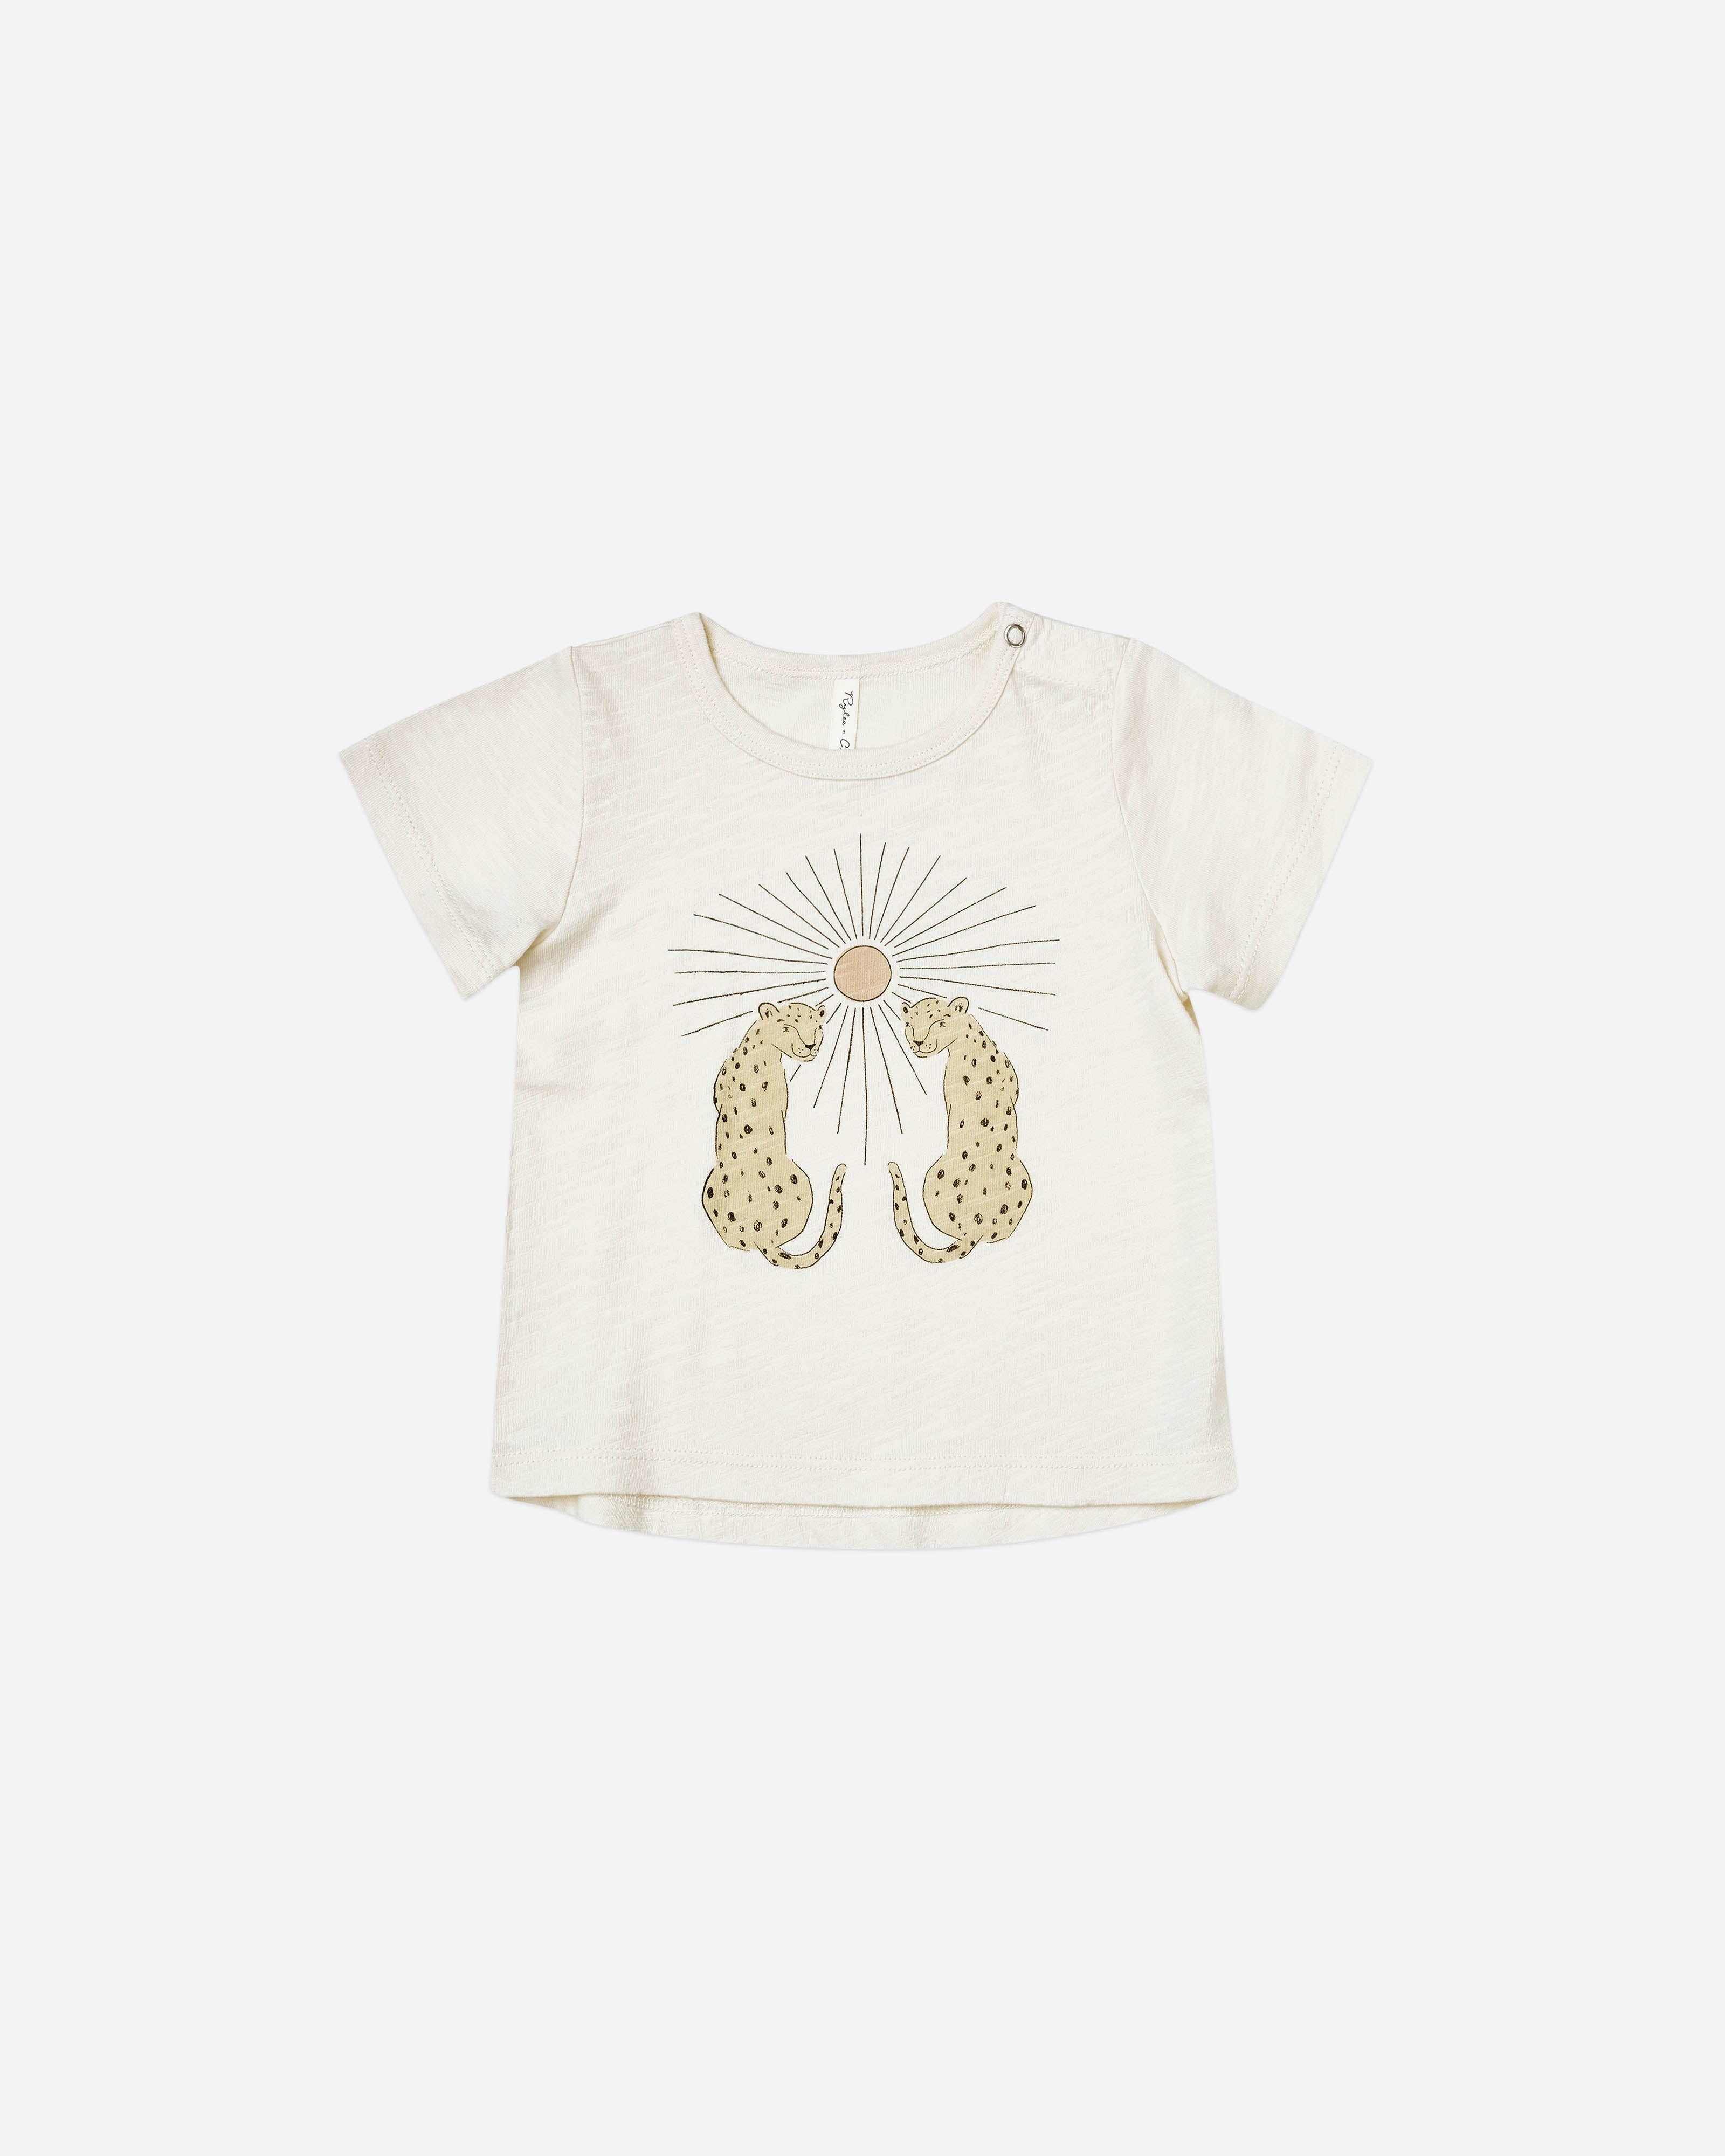 basic tee || shine - Rylee + Cru | Kids Clothes | Trendy Baby Clothes | Modern Infant Outfits |